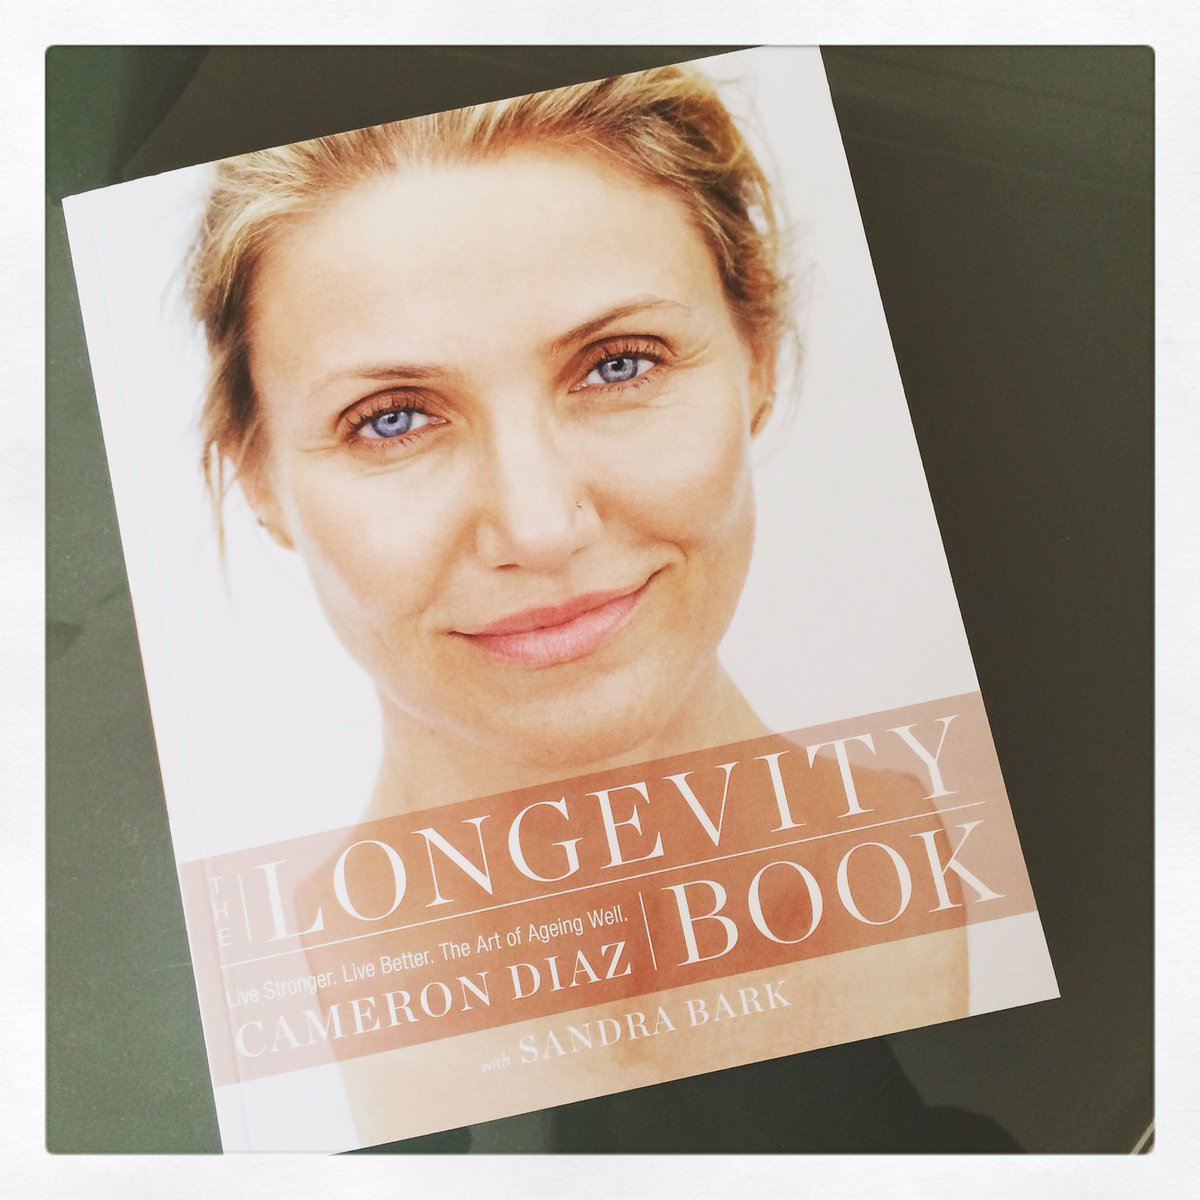 Every woman shld read #TheLongevityBook @CameronDiaz To age gloriously and 'to be fully, unapologetically, yourself'